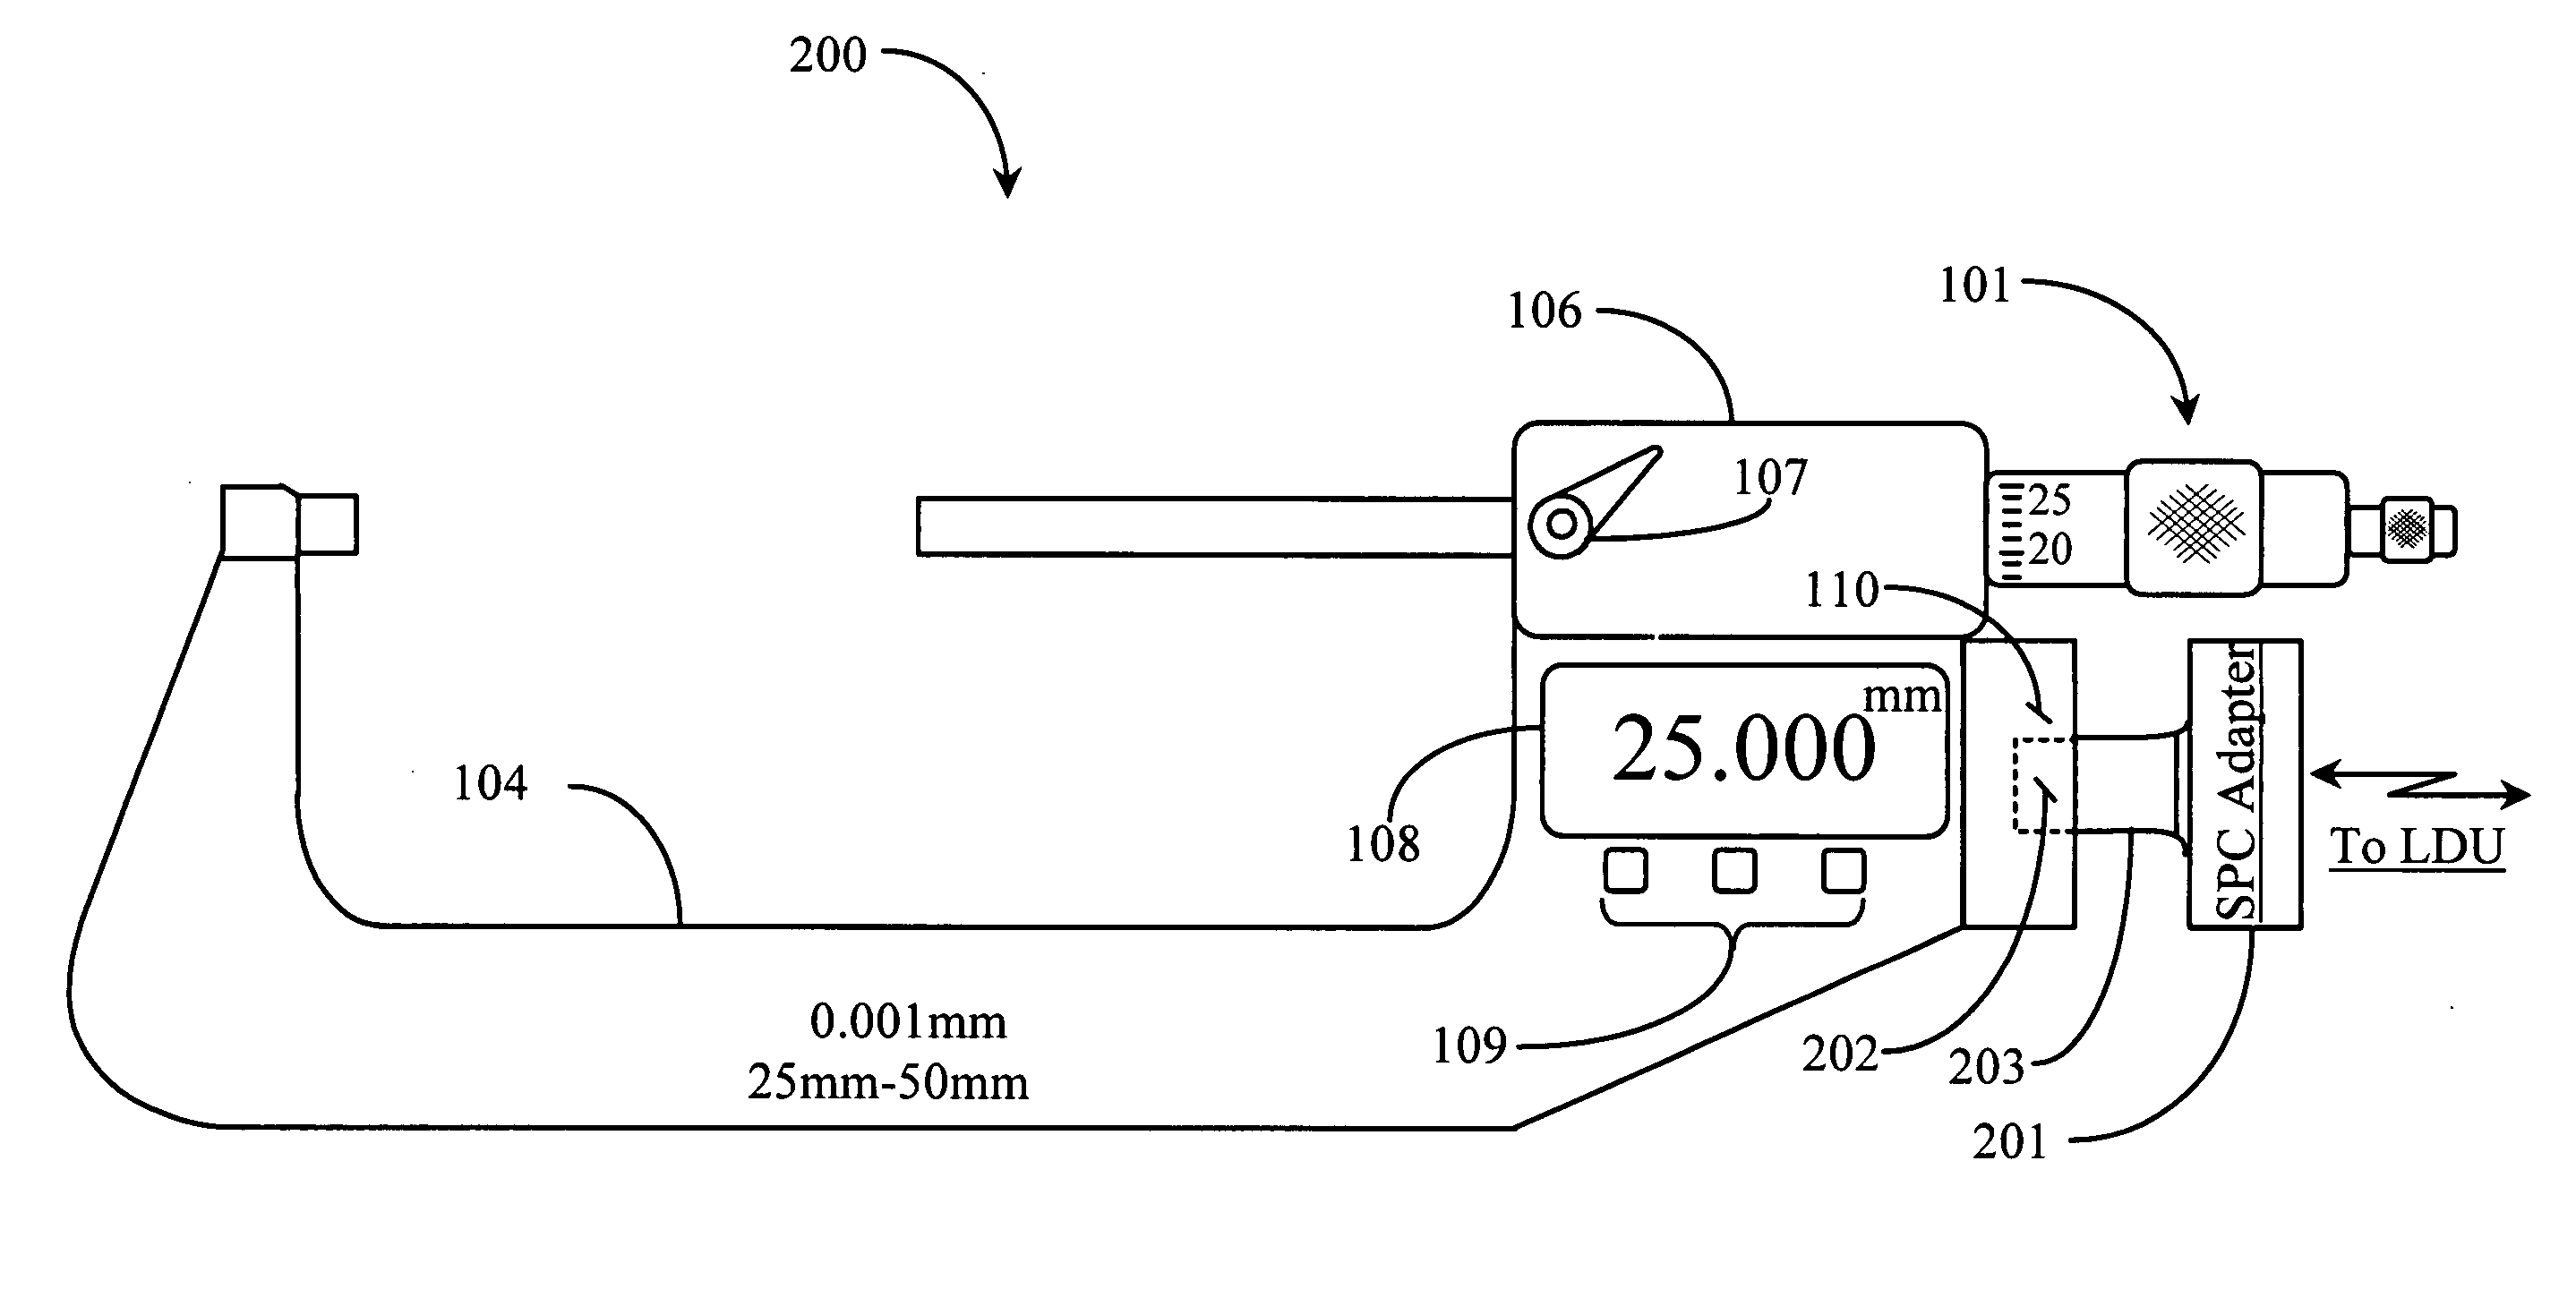 System for wireless local display of measurement data from electronic measuring tools and gauges